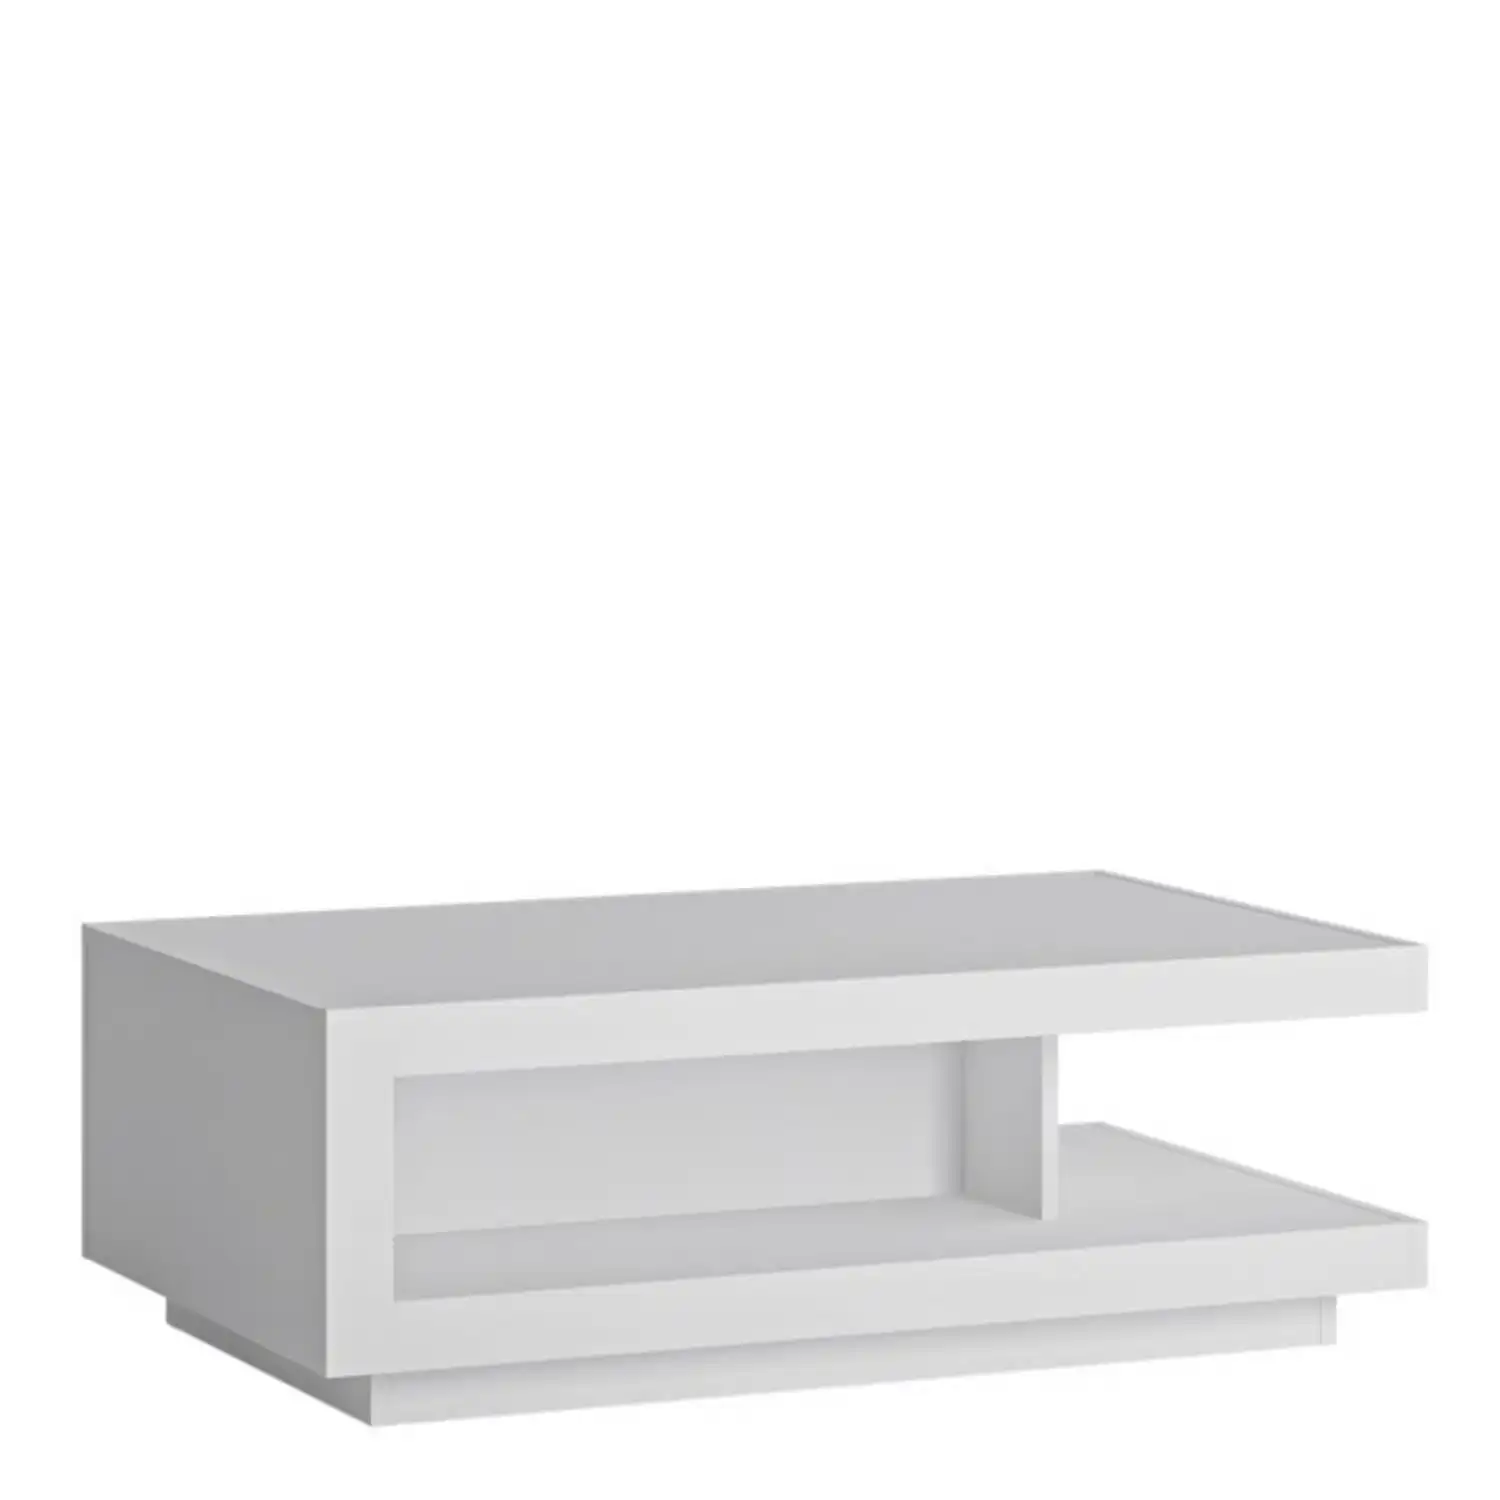 White and High Gloss Designer Coffee Centre Table with Shelving